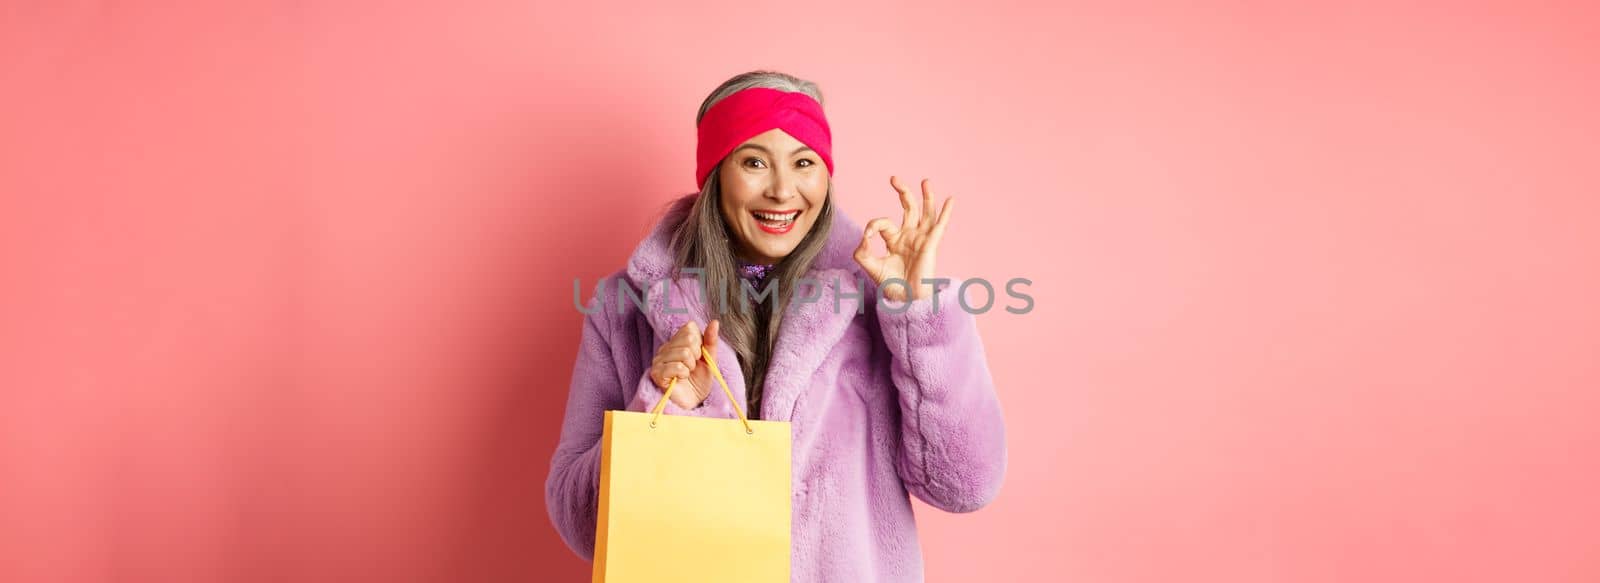 Shopping and fashion. Happy asian senior woman in stylish clothes holding paper bag from store, showing OK sign, recommending shop, pink background.